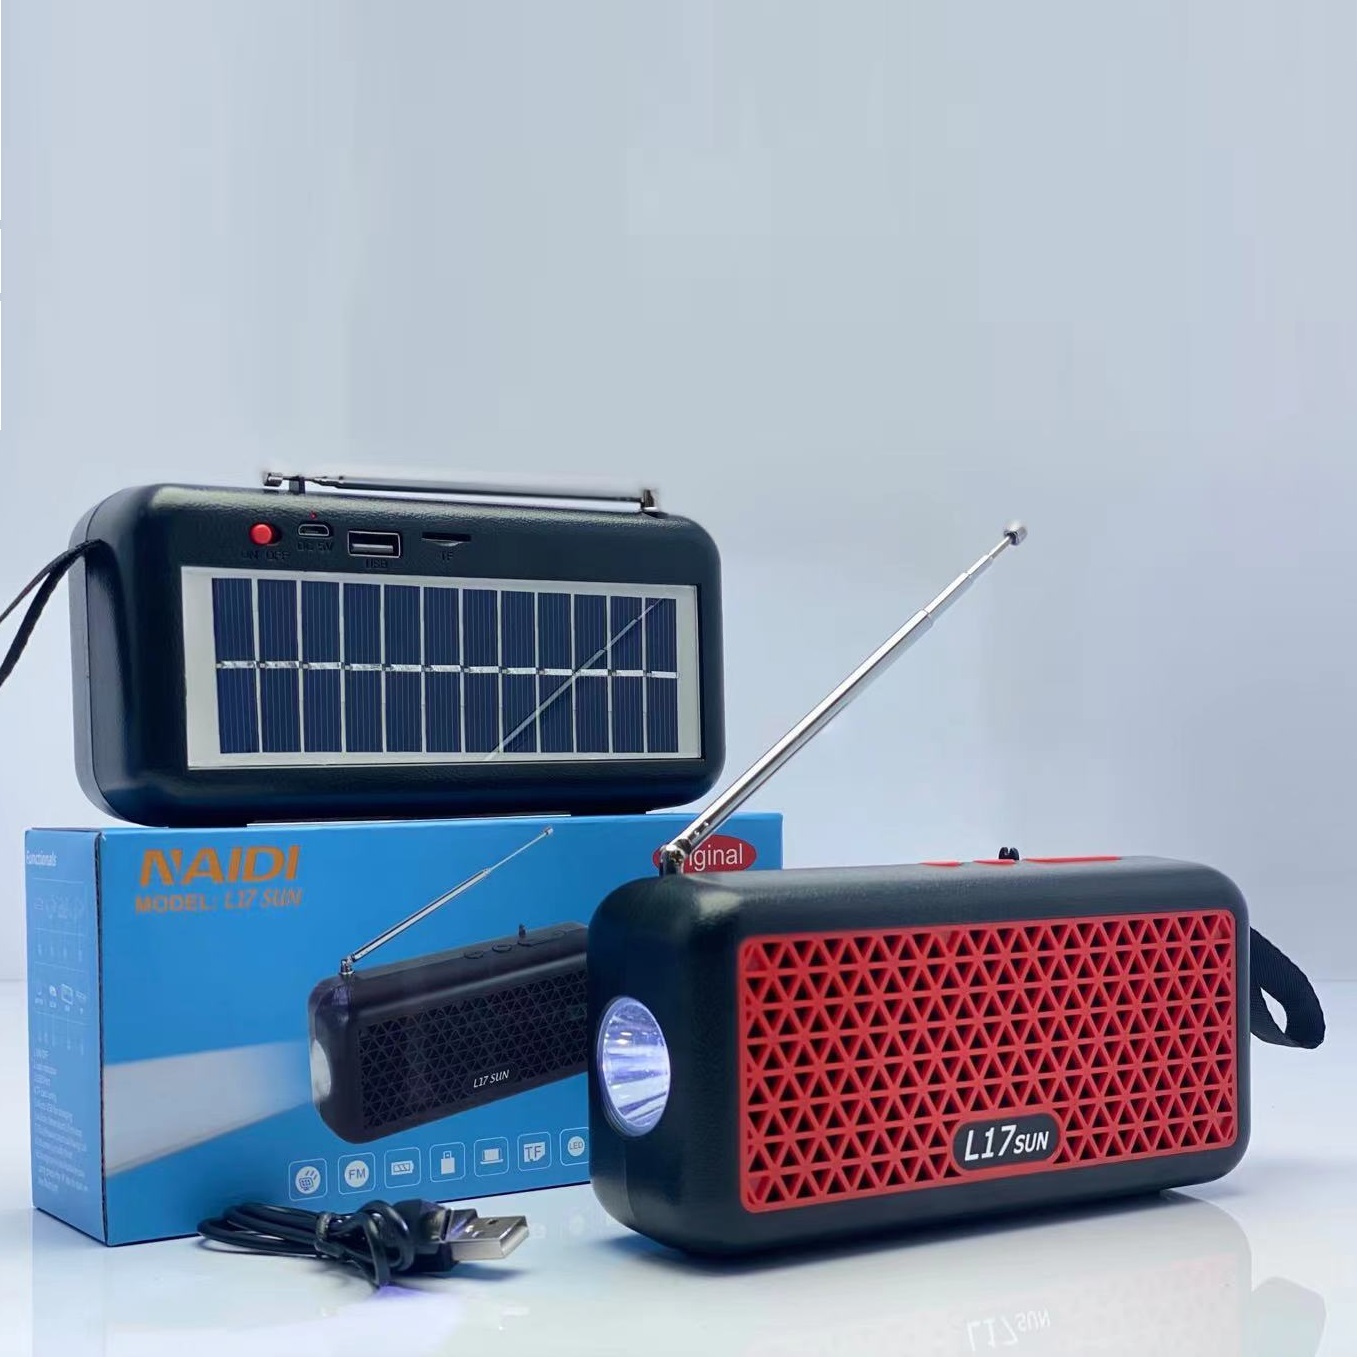 Outdoor solar lighting and sound